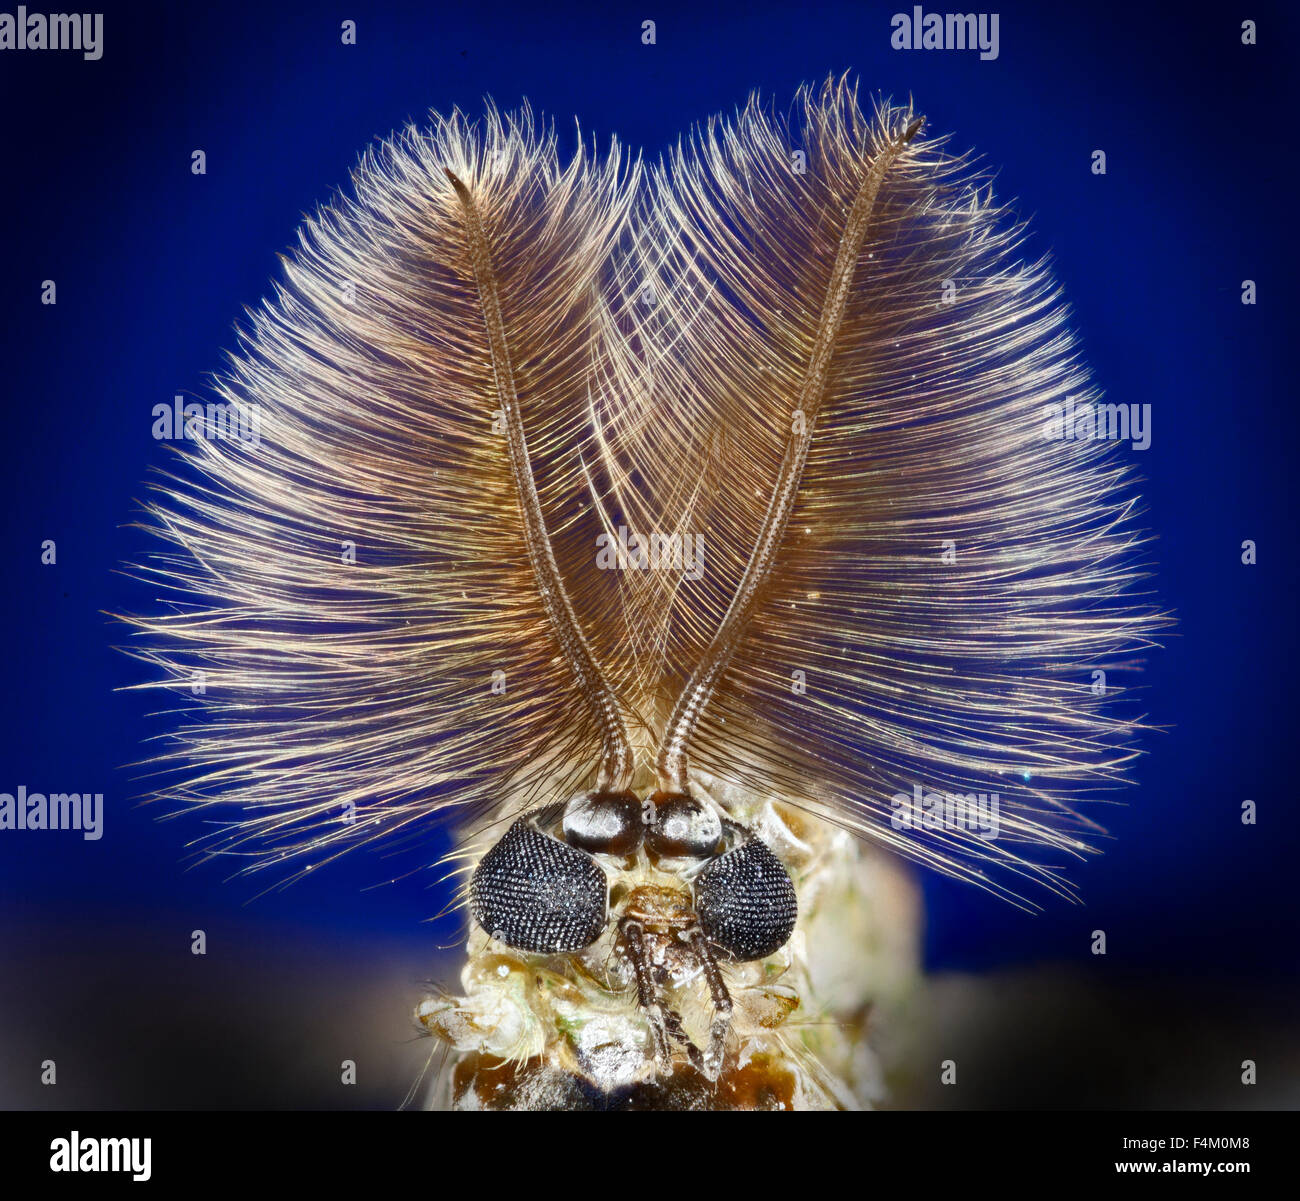 Midge face, compound eyes and  feathery (plumose) antennae high macro view, blue background Stock Photo